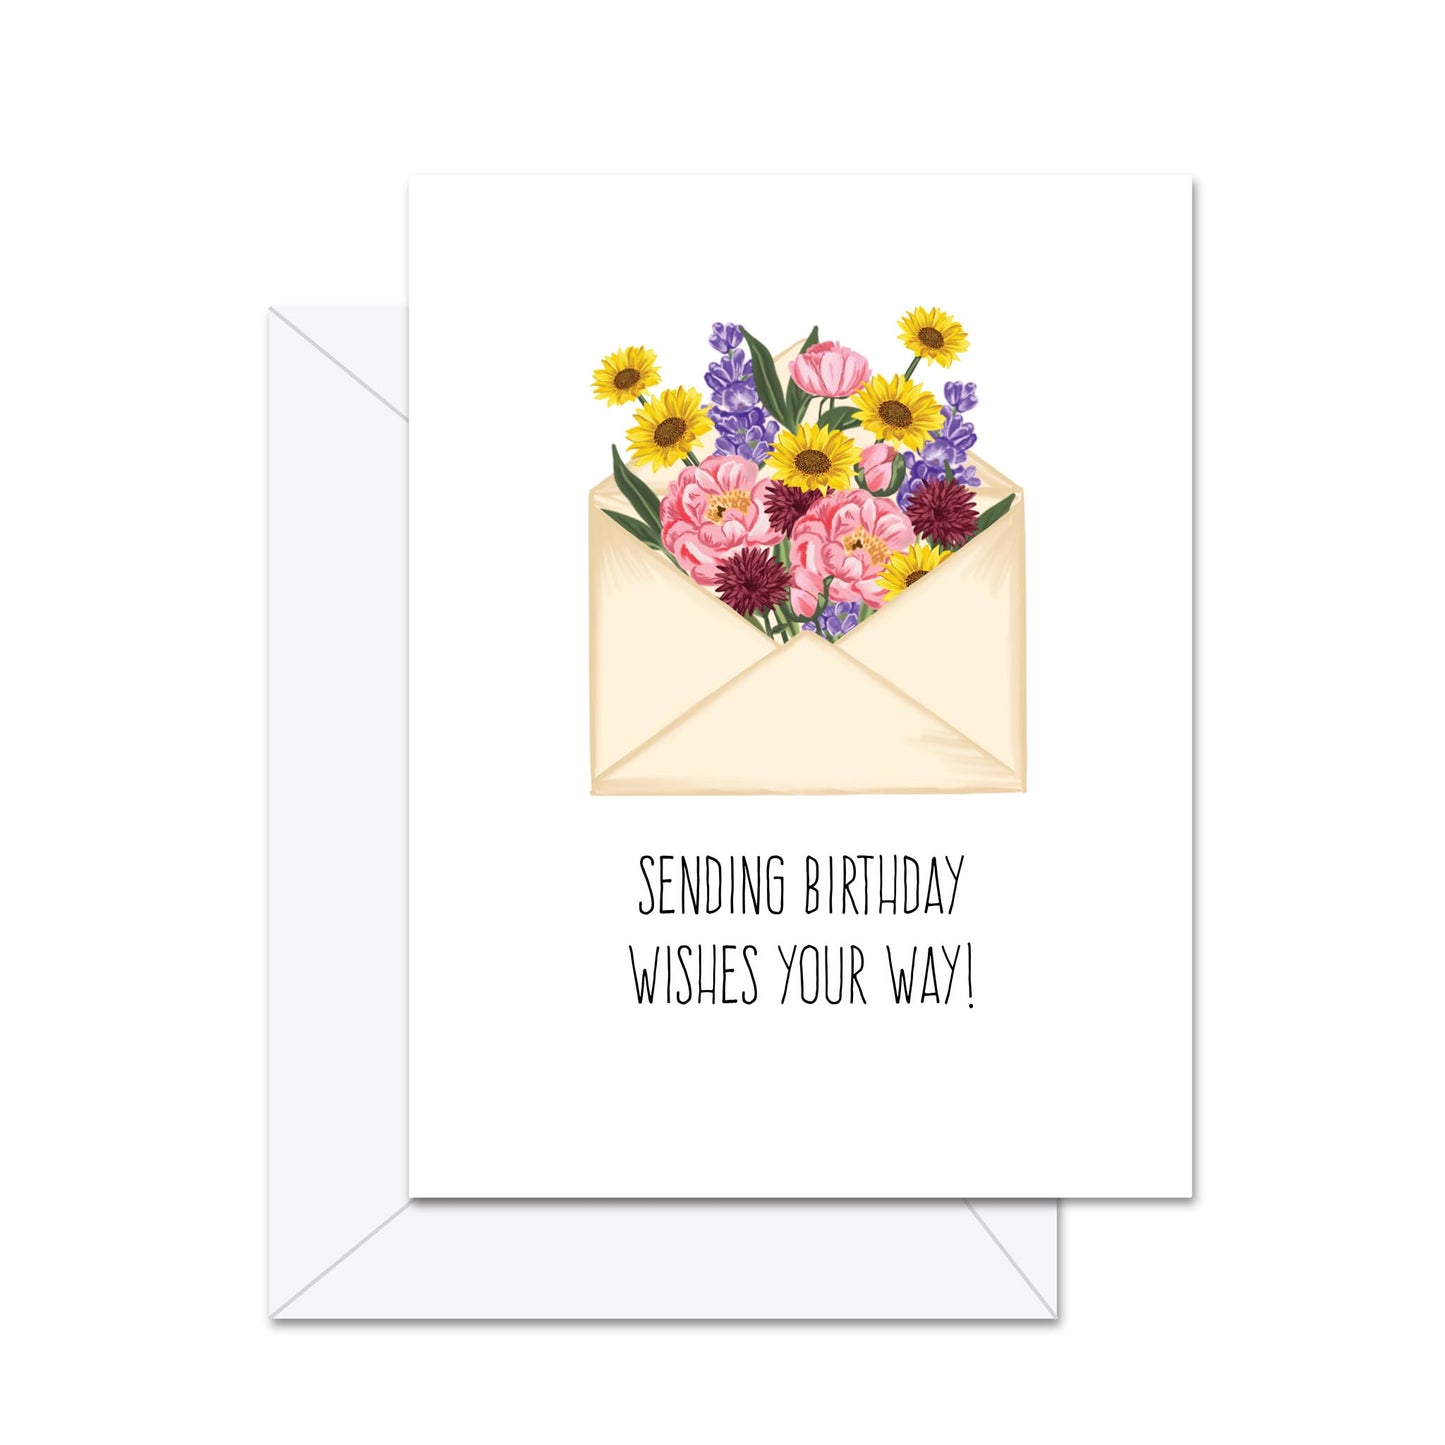 Sending Birthday Wishes Your Way!  - Greeting Card